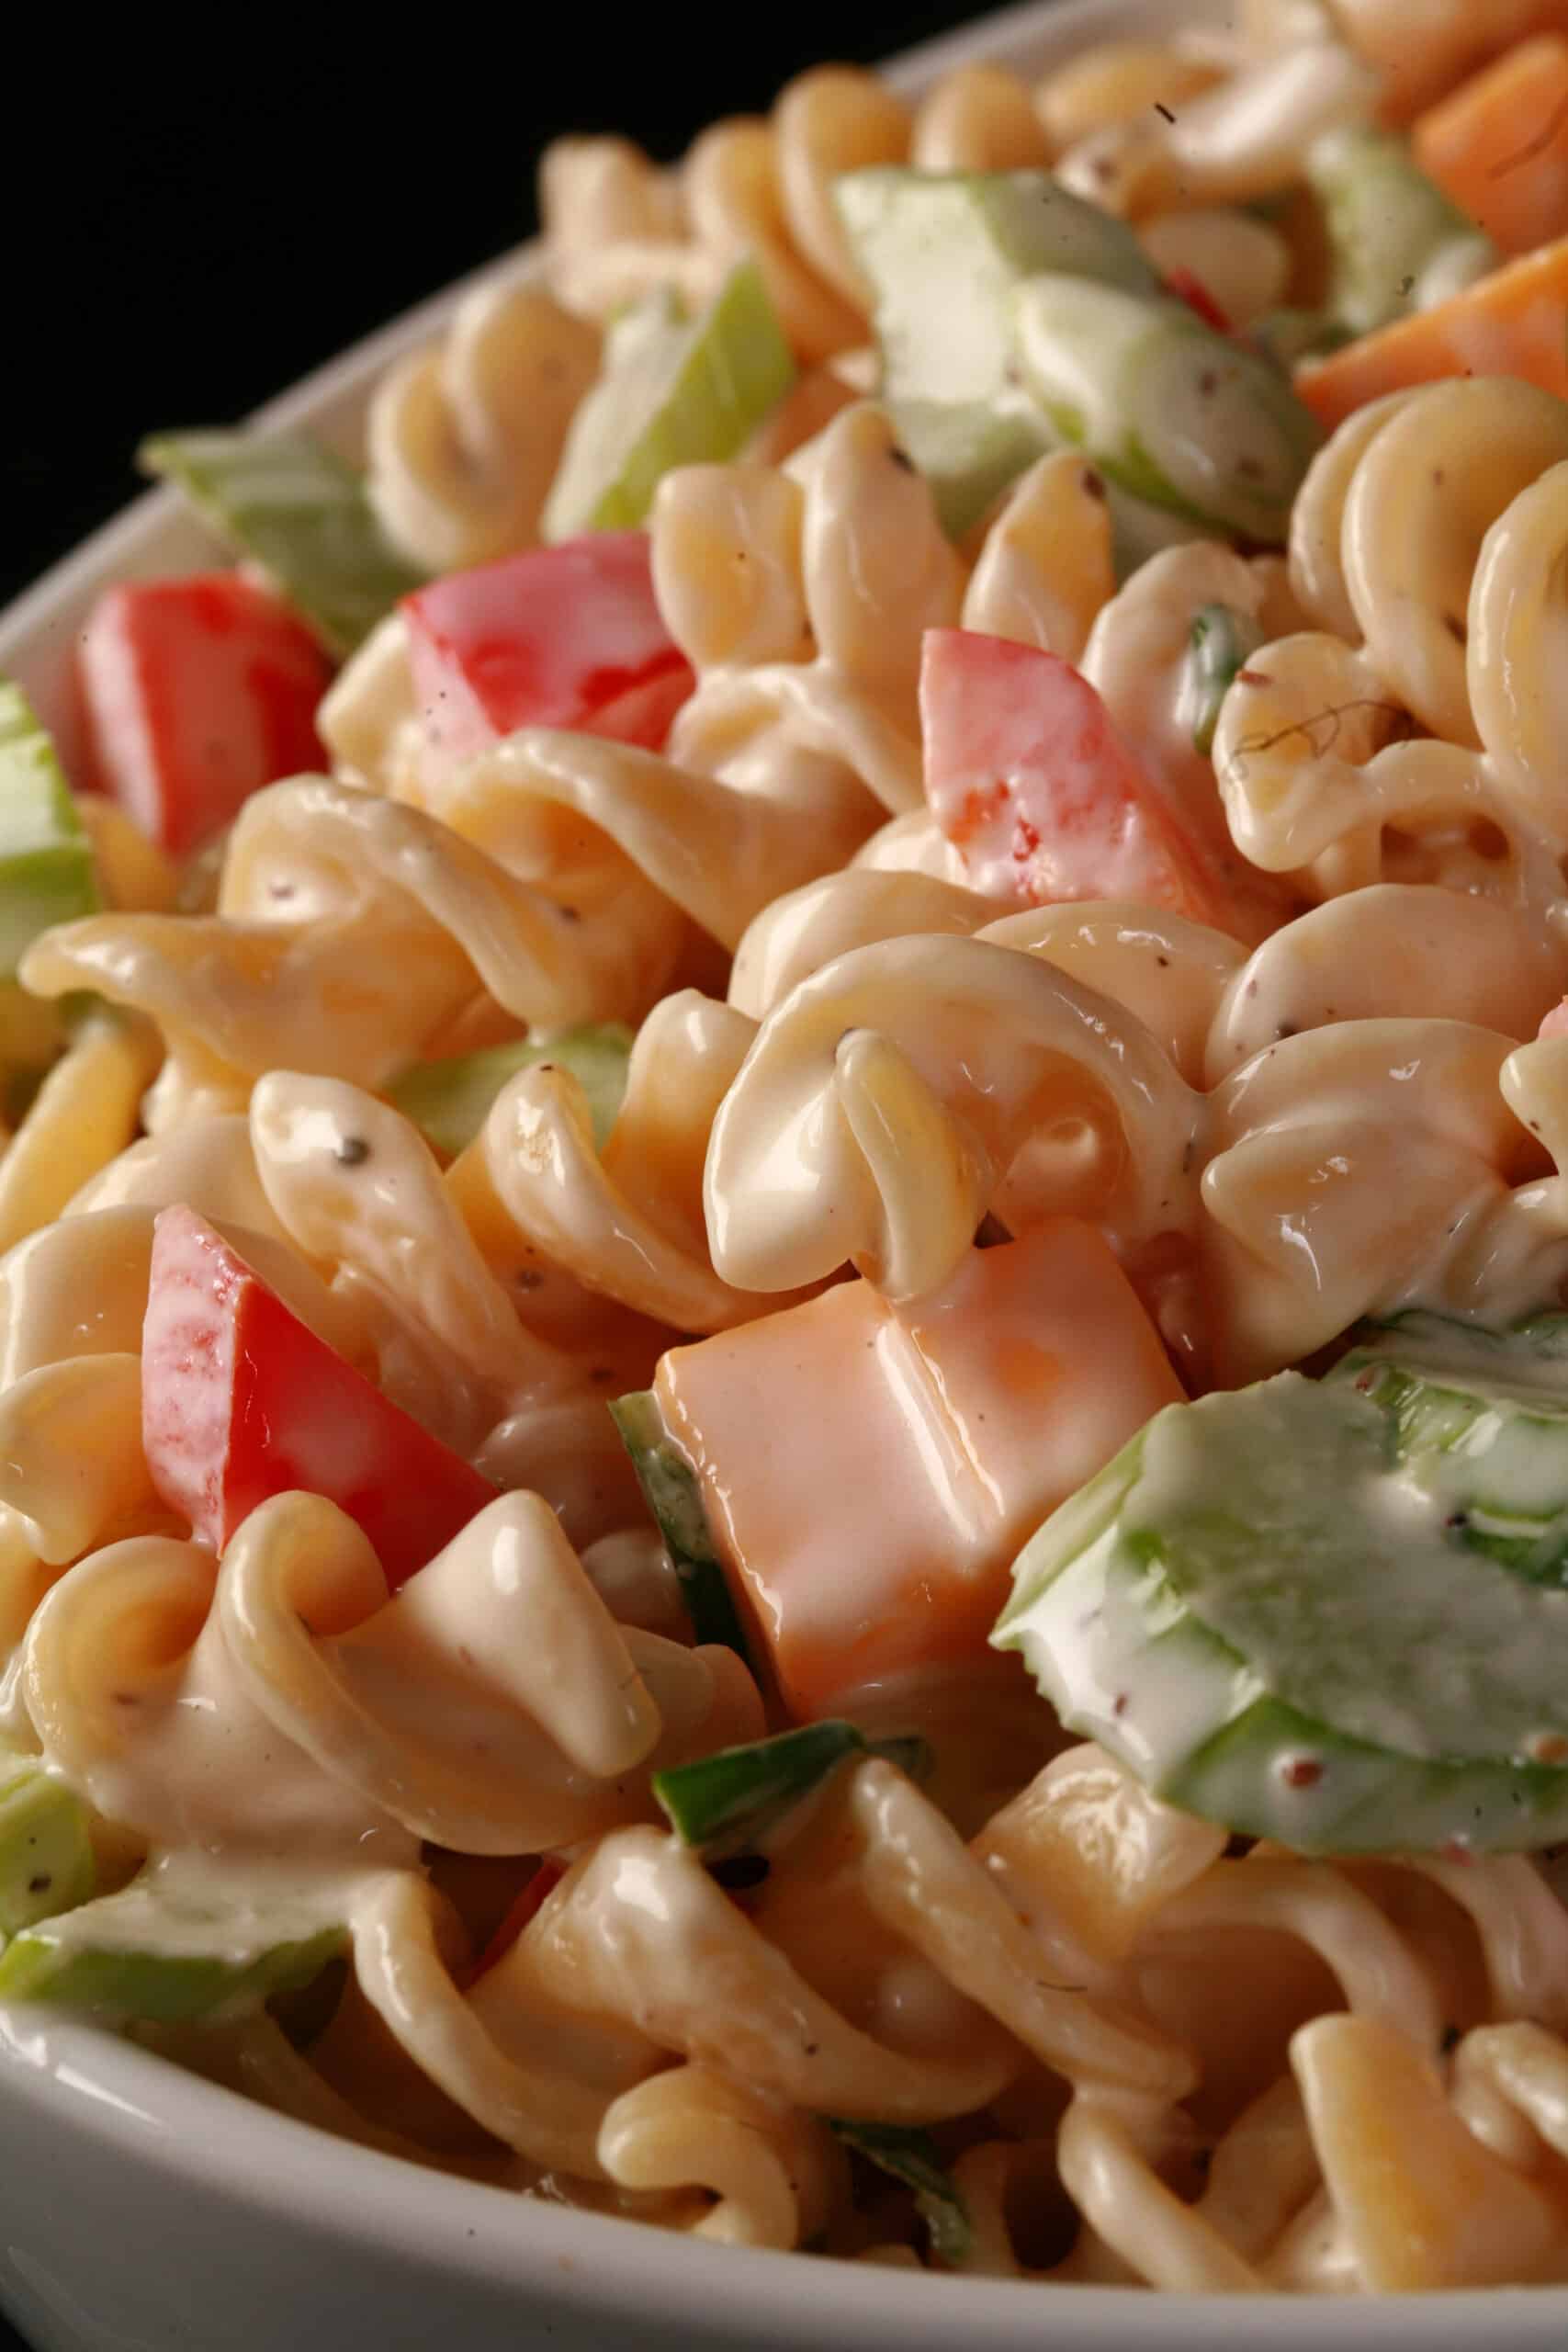 A close up view of a creamy pasta salad made with rotini, red peppers, celery, cheese, and green onions.